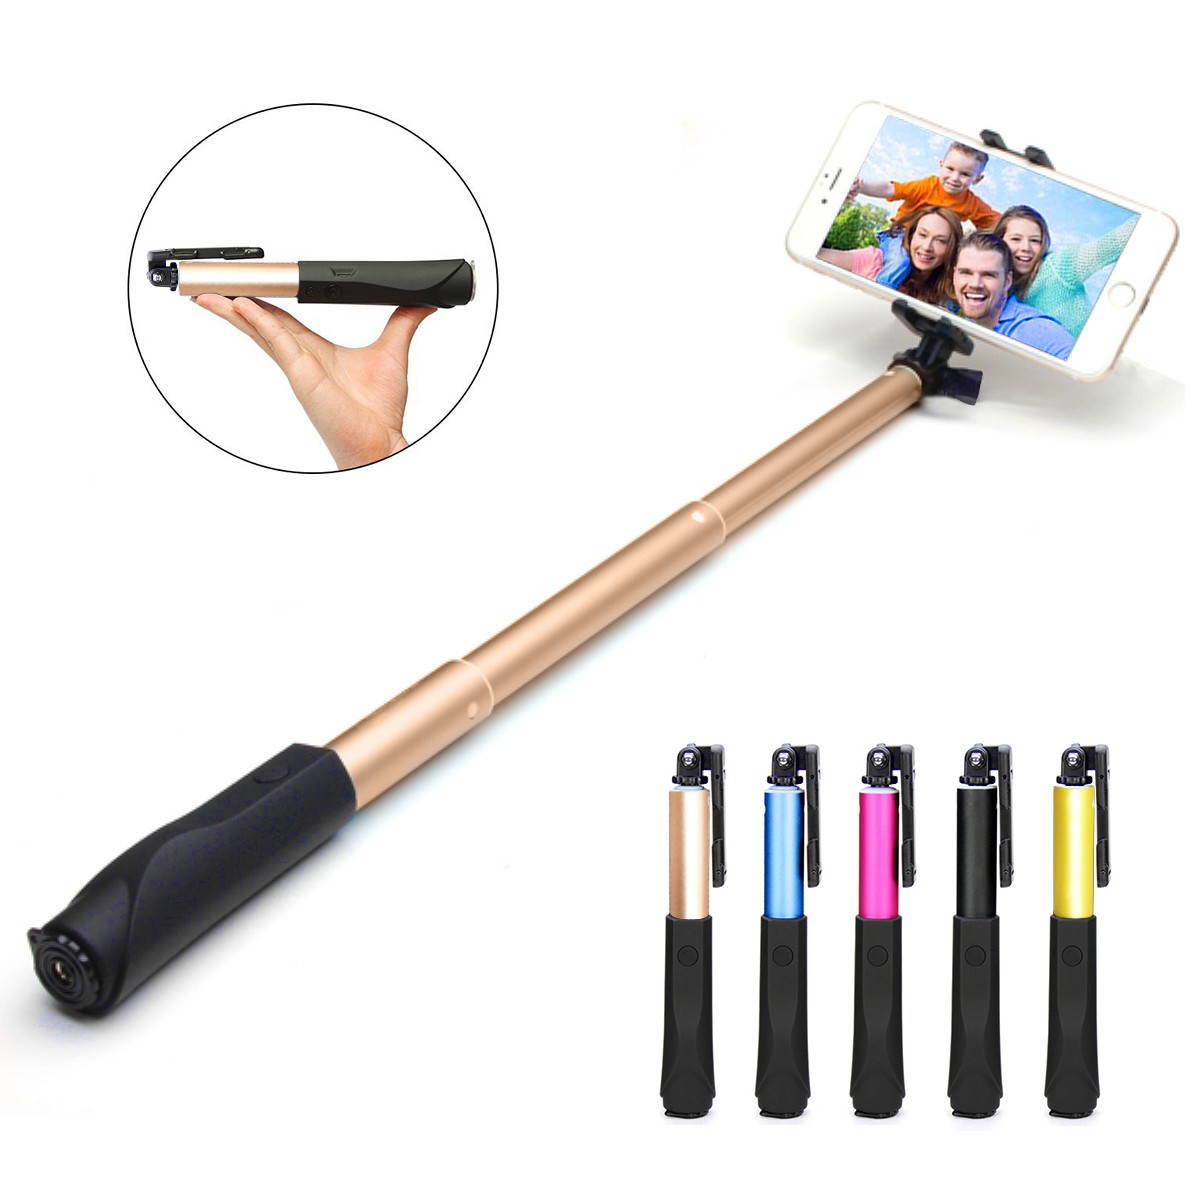 Universal Extendable Handheld Remote Selfie Stick for iOS for Samsung Android